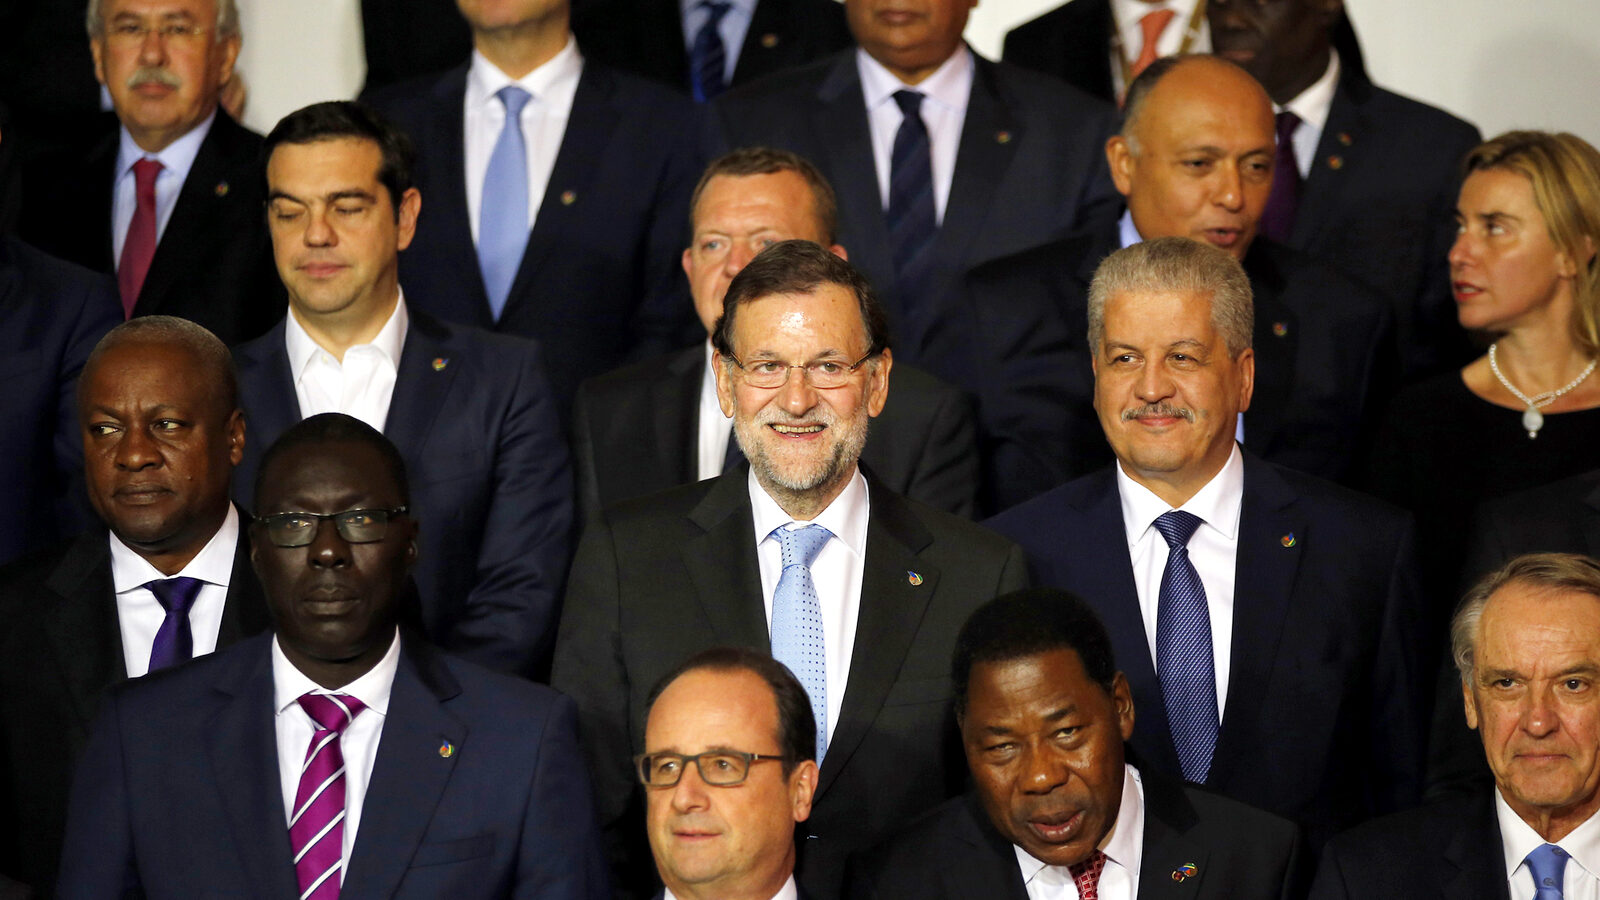 Spain's Prime Minister Mariano Rajoy, center, smiles as he poses for a family picture with European Union and African leaders on the occasion of an informal summit on migration in Valletta, Malta, Wednesday, Nov. 11, 2015. (AP Photo/Antonio Calanni)